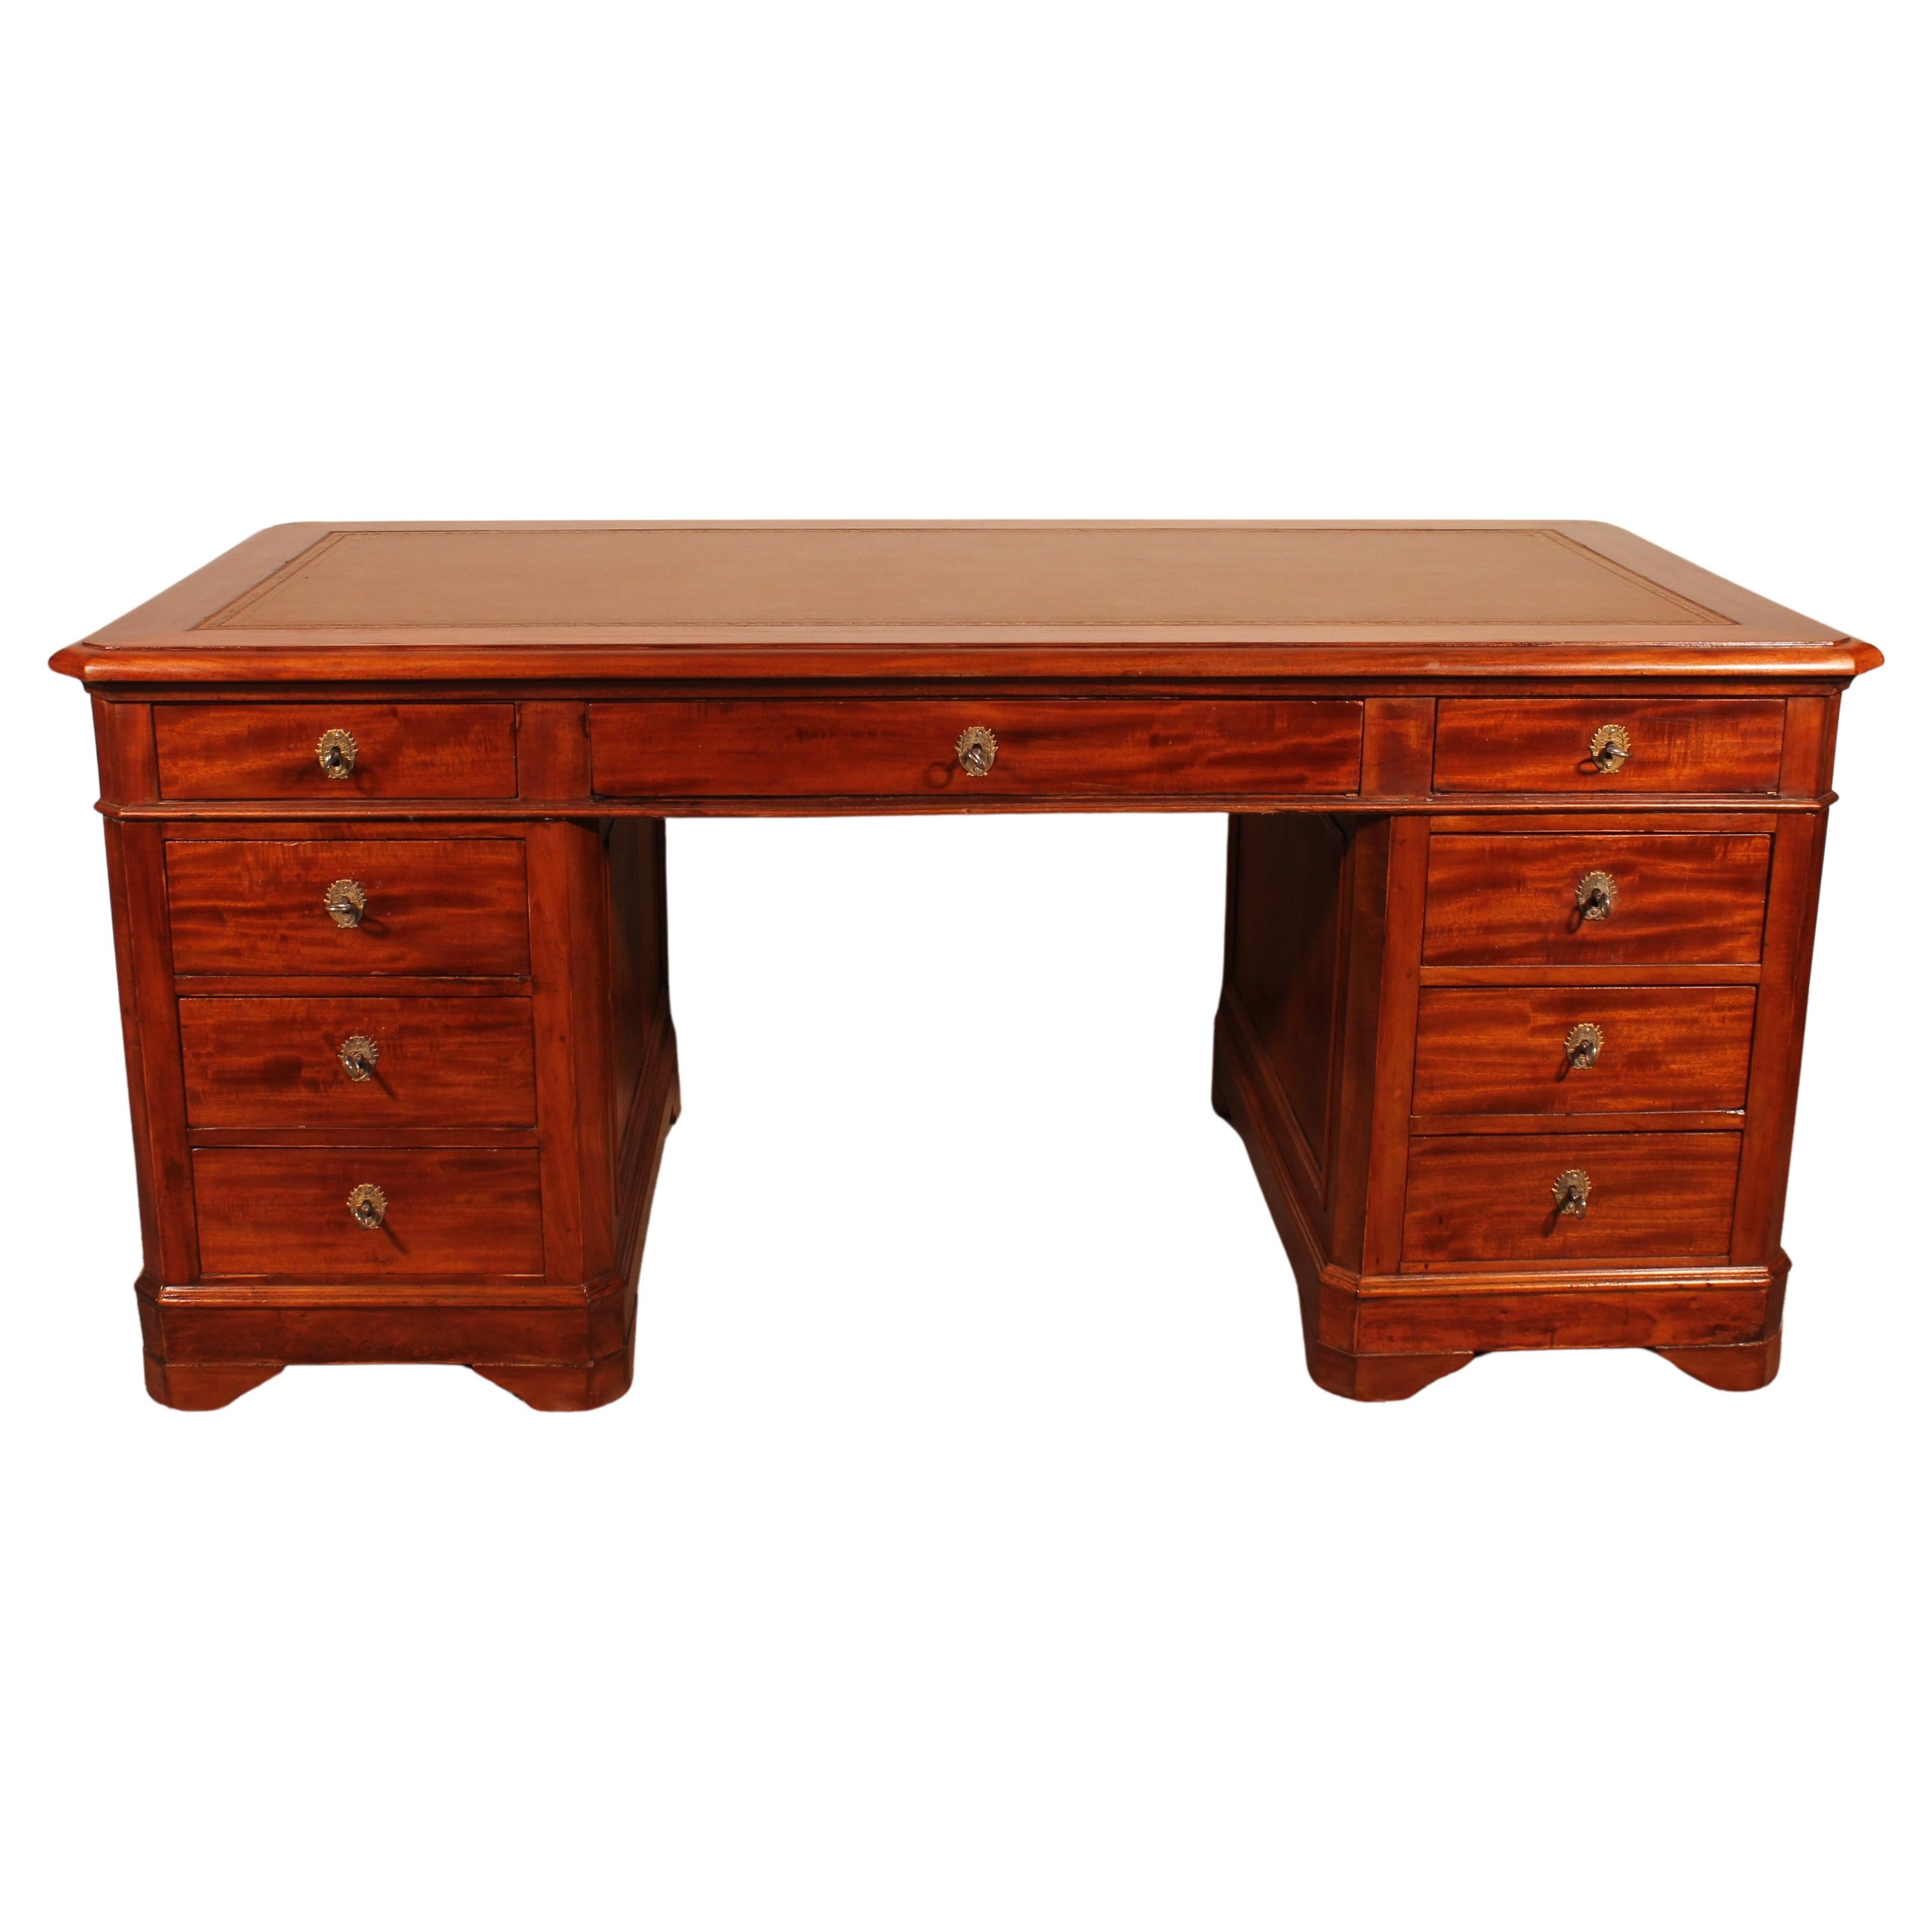 Large Pedestal Desk In Mahogany From The 19th Century For Sale